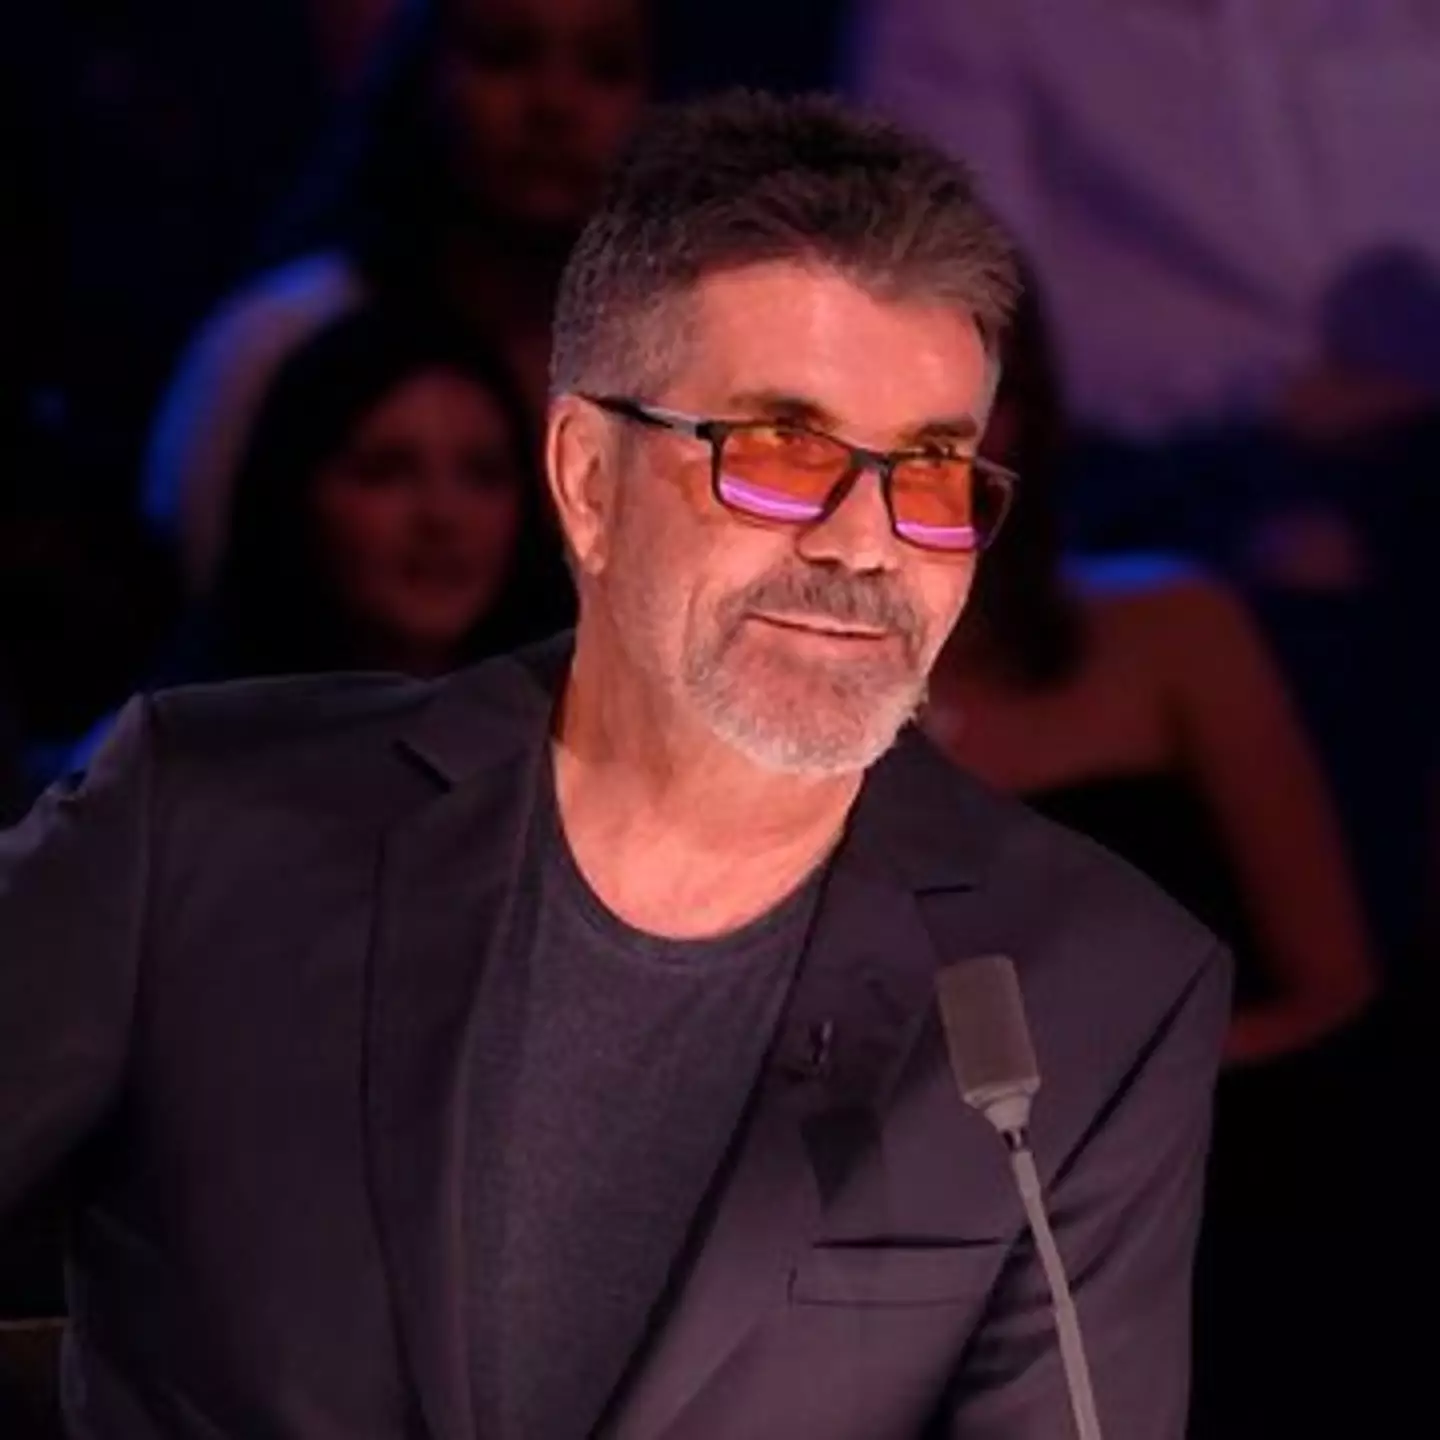 Simon Cowell appeared to address the 'fix' claims moments for Sydnie was crowned as the winner. (ITV)